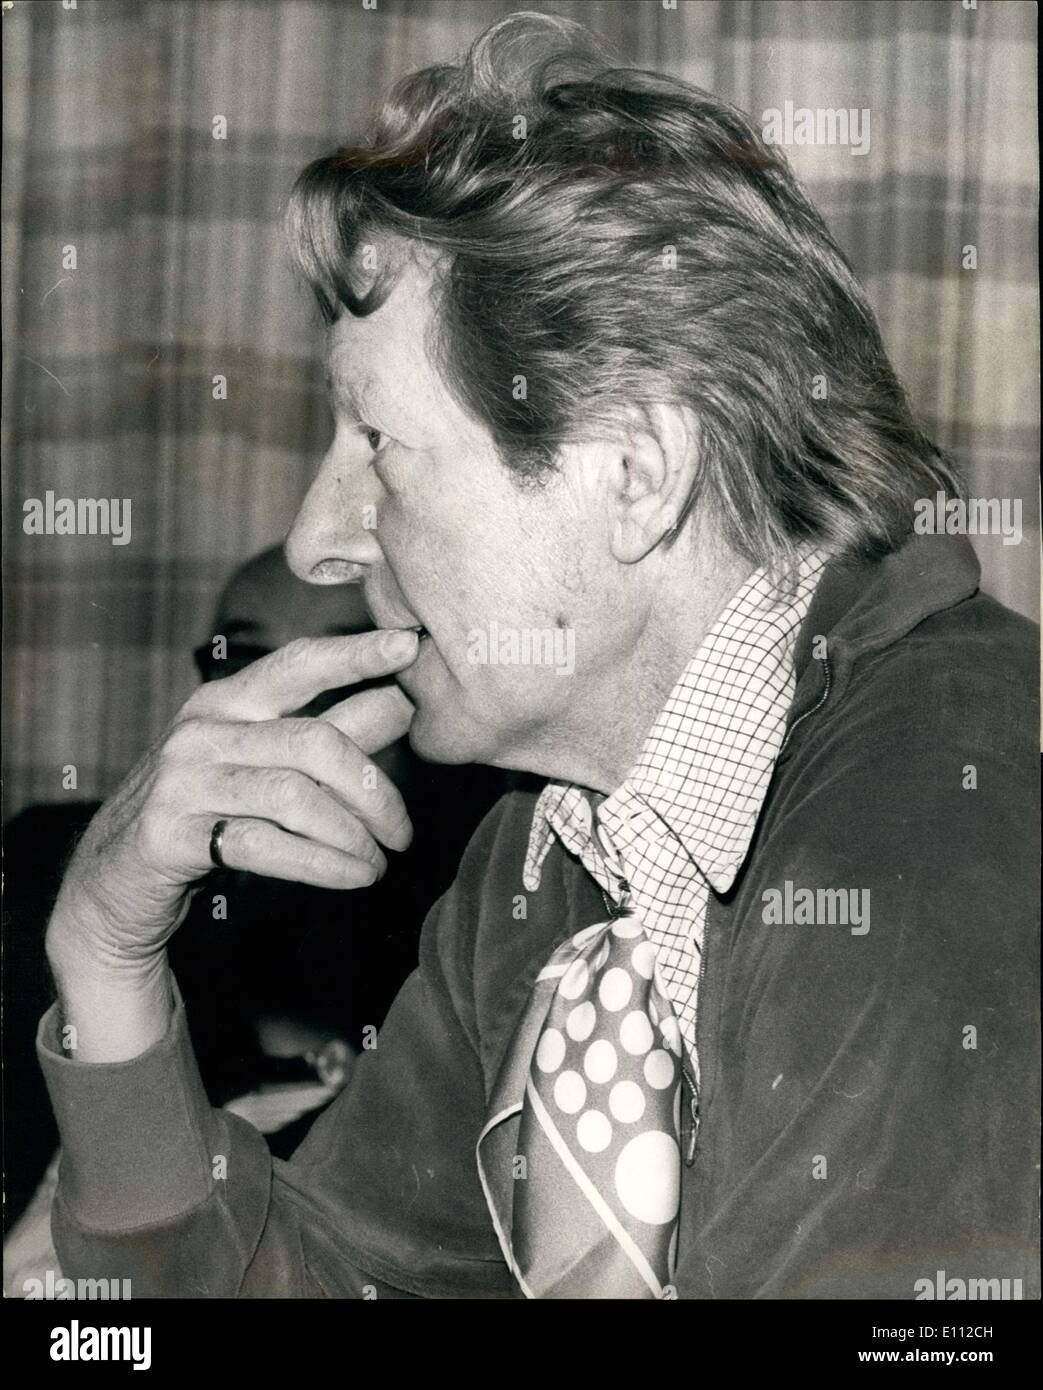 May 05, 1975 - Reception for Danny Kaye: The variety Club of Great Britain, the children's charity organisation, is to oen its Autumn programme with a concert featuring international star Danny Kaye. The event, ''An Evening with Danny Kaye'', takes place at the Royal Festival Hall on Saturday, September 27th, and is being presented by variety in association with the London Symphony Orchestra. Photo Shows Danny Kaye pictured during today's Press reception at the Royal Festival Hall in London. Stock Photo